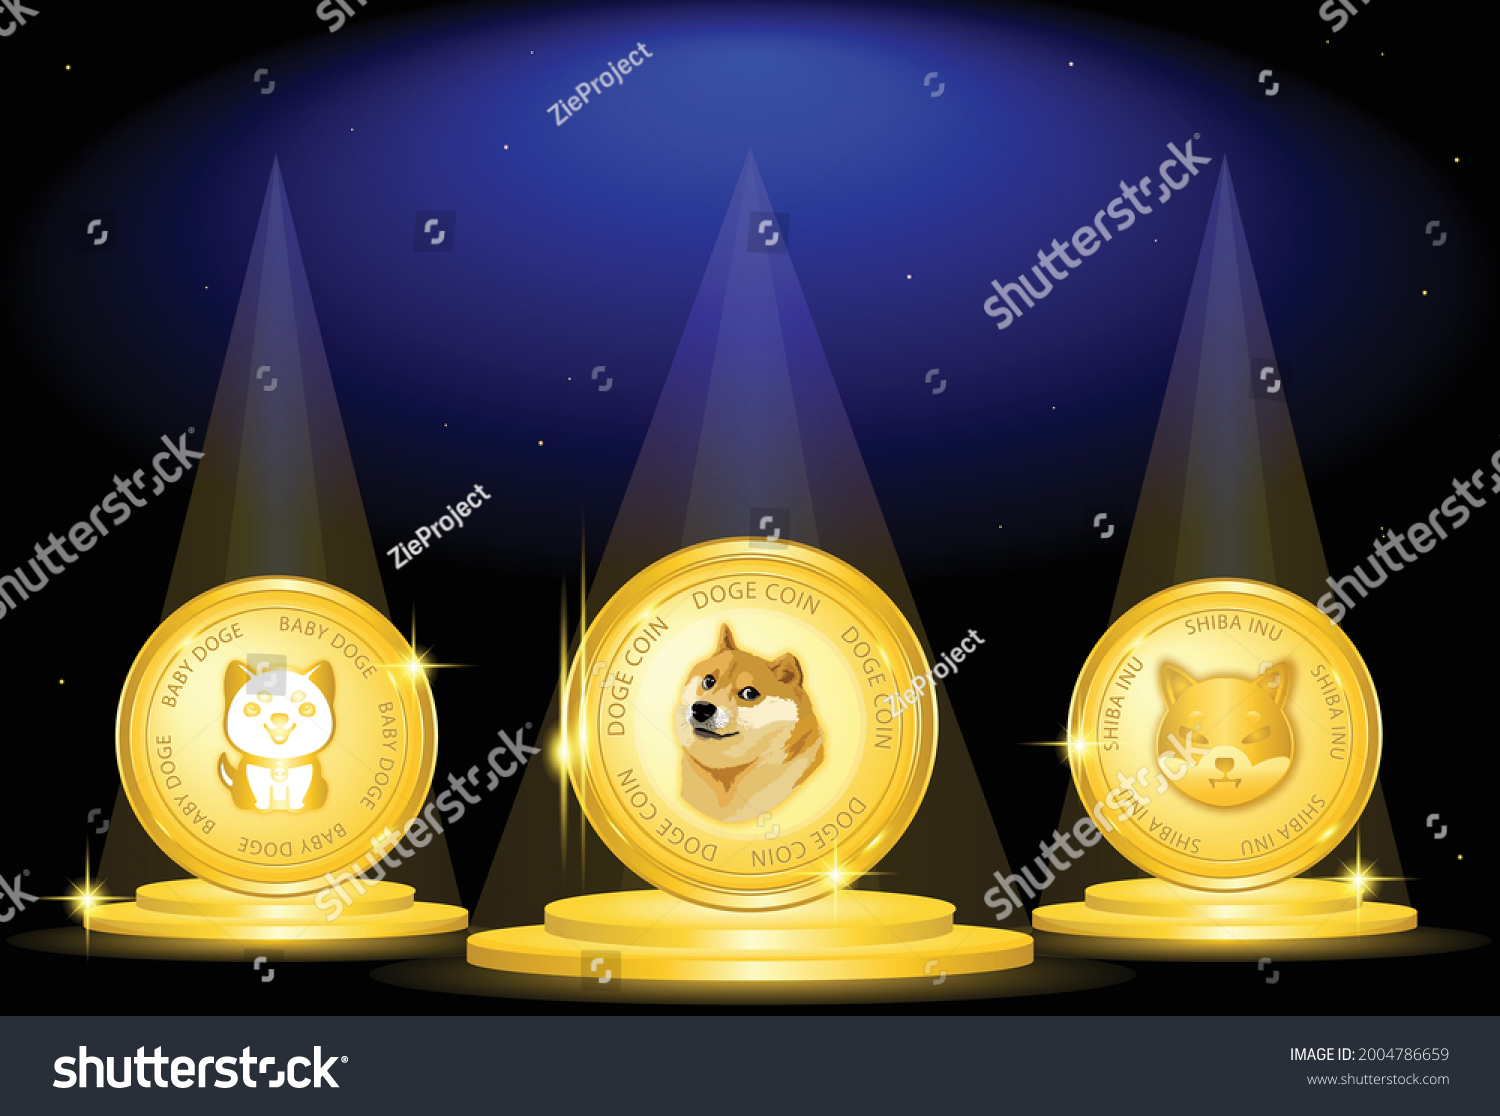 SVG of Doge coins, crypto meme with shiba inu and baby doge. vector eps10 svg